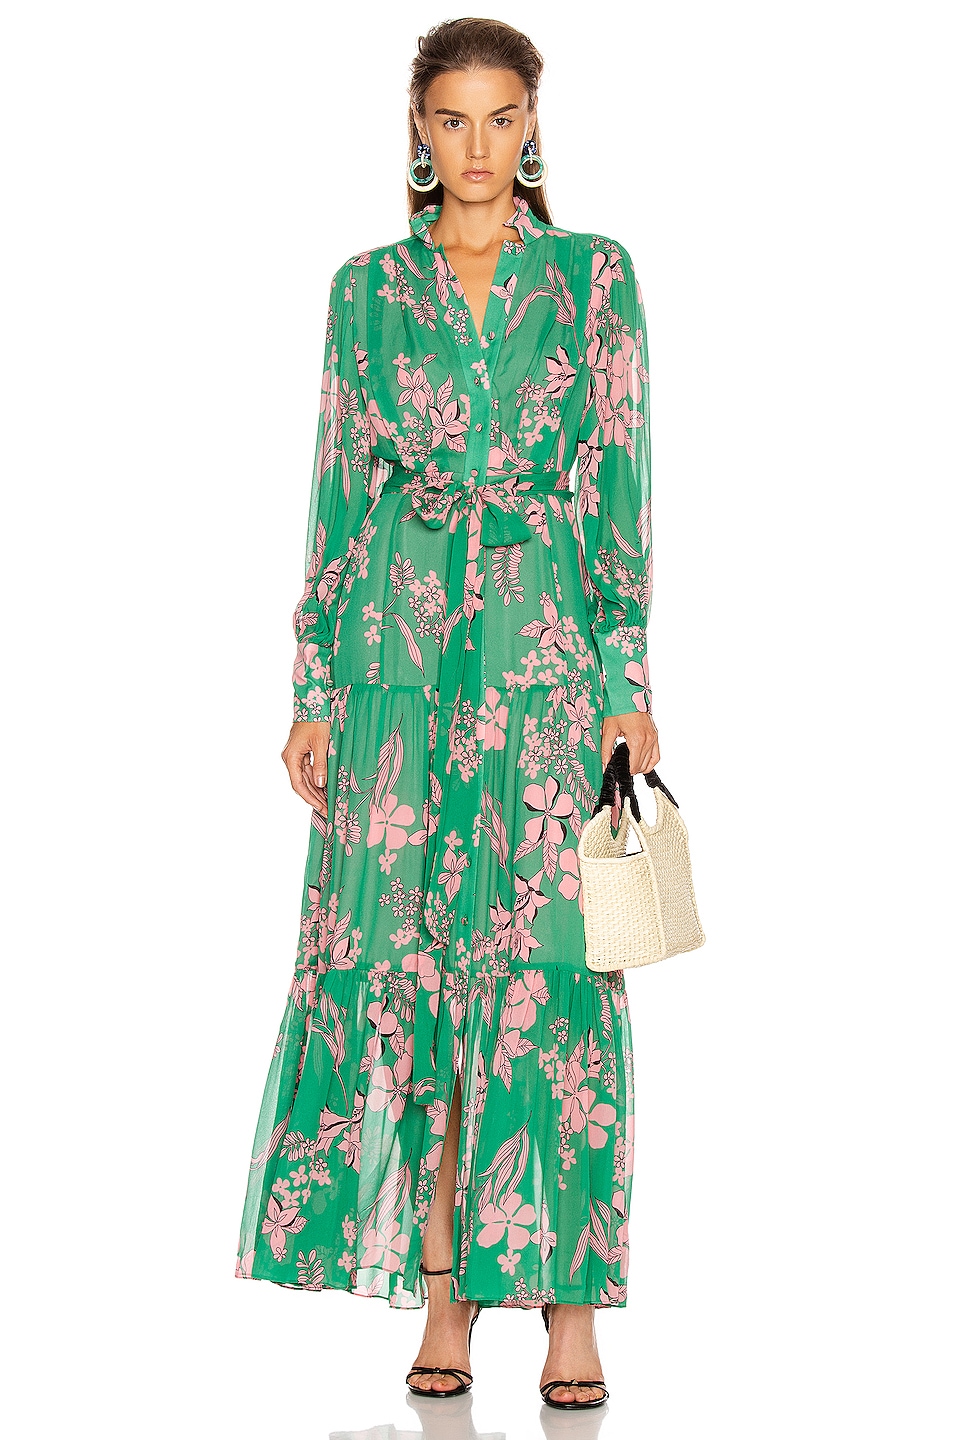 Image 1 of Alexis Rhoda Dress in Island Floral